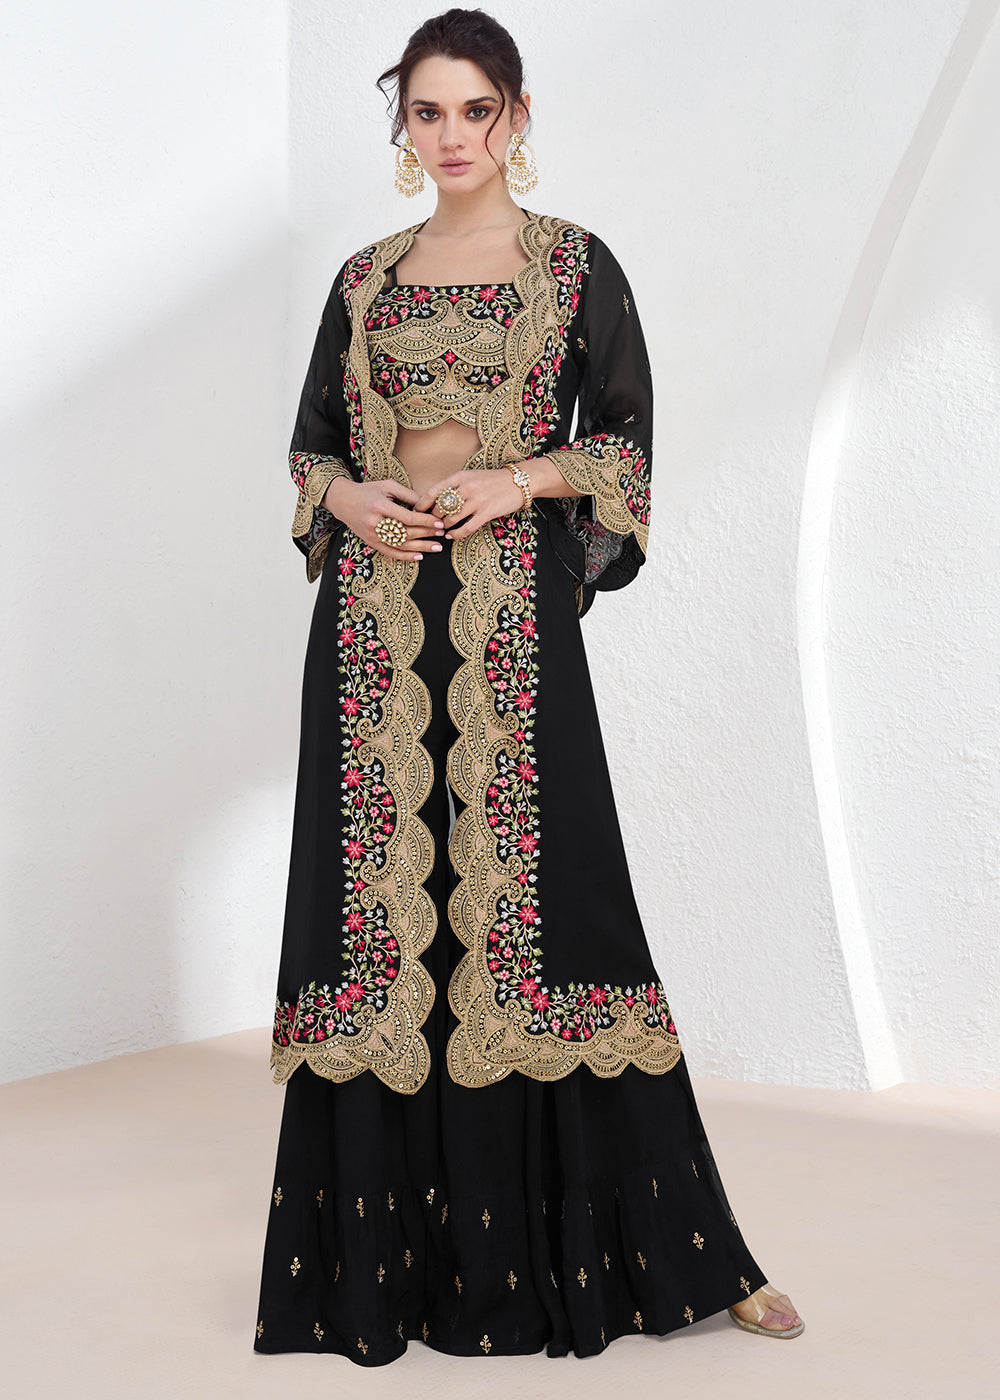 Onyx Black Embroidered Georgette Top & Skirt Set with Jacket